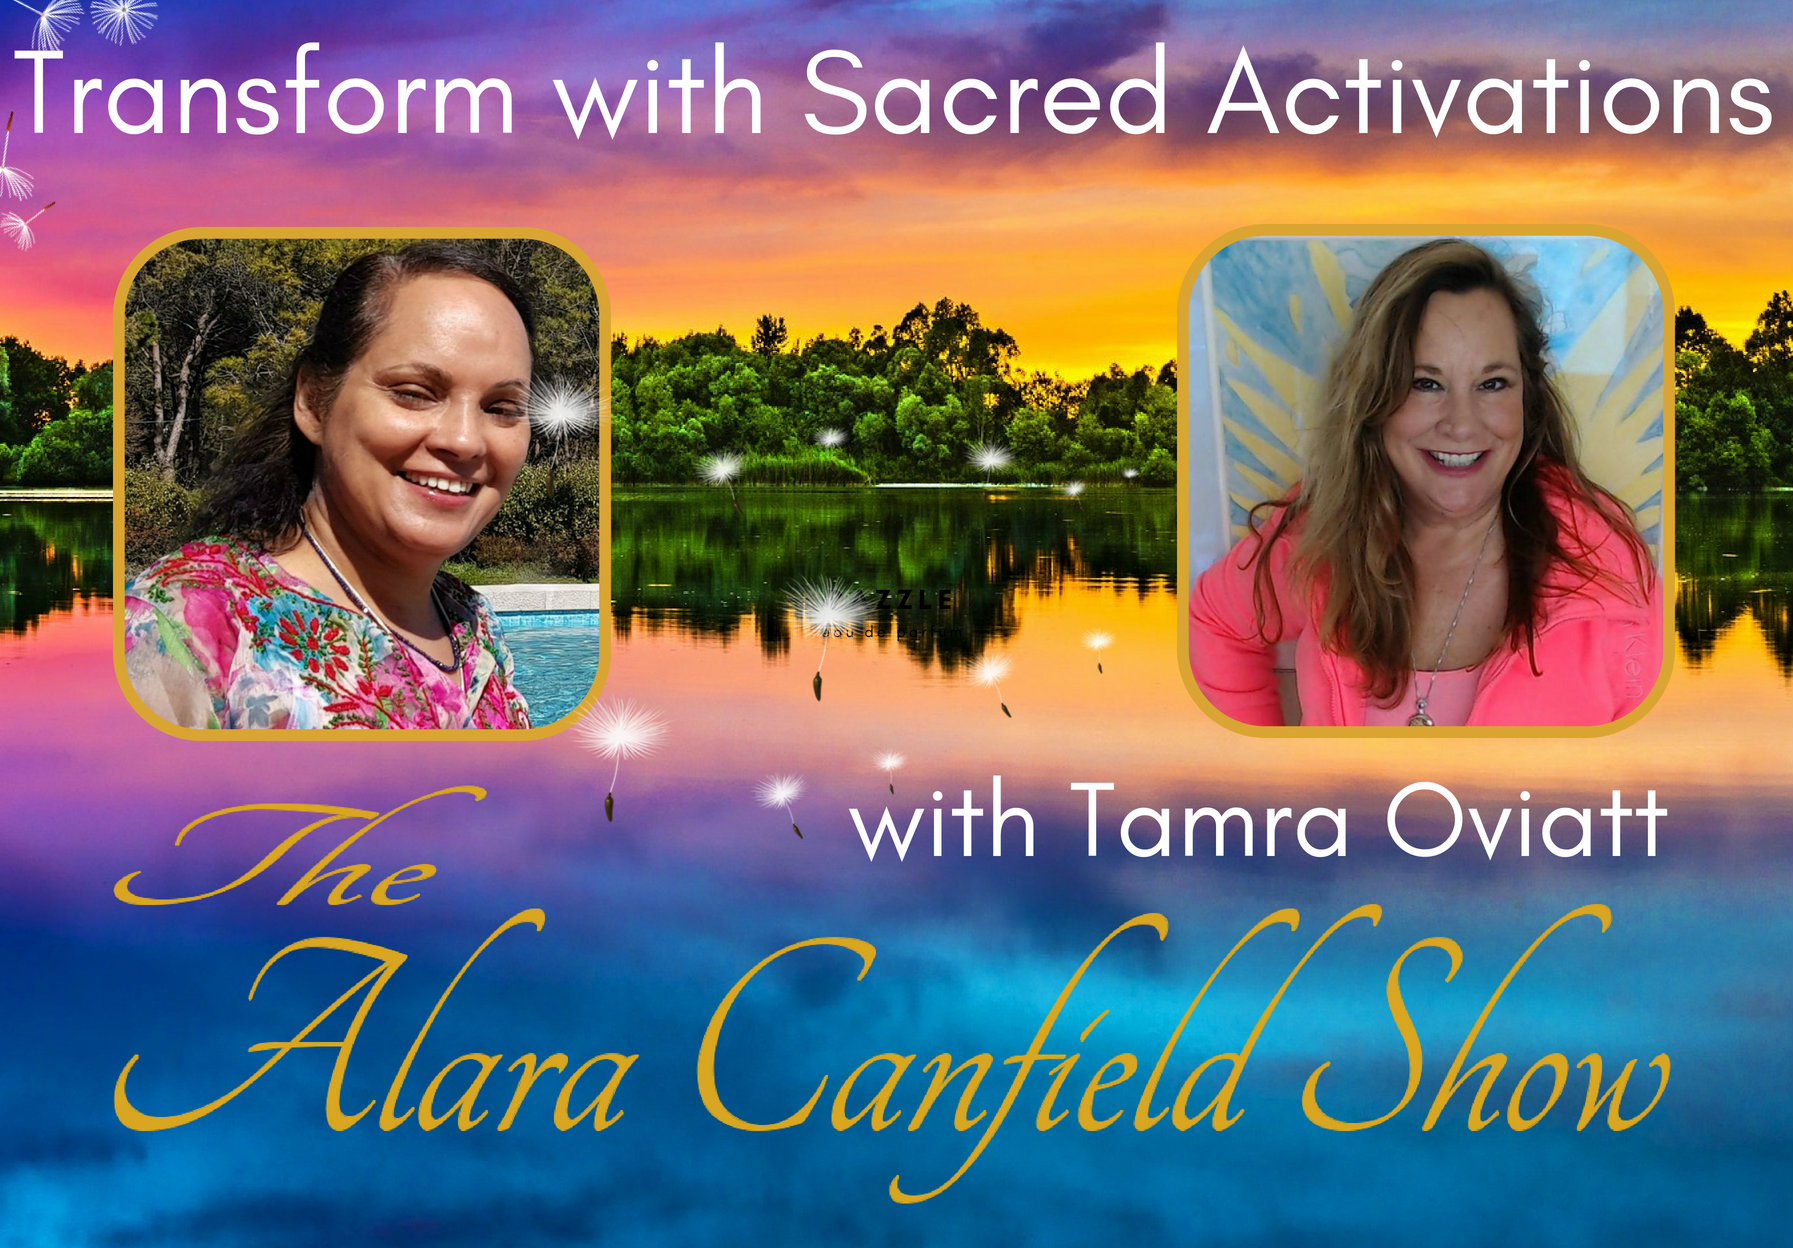 Transform with Sacred Activations with Tamra Oviatt